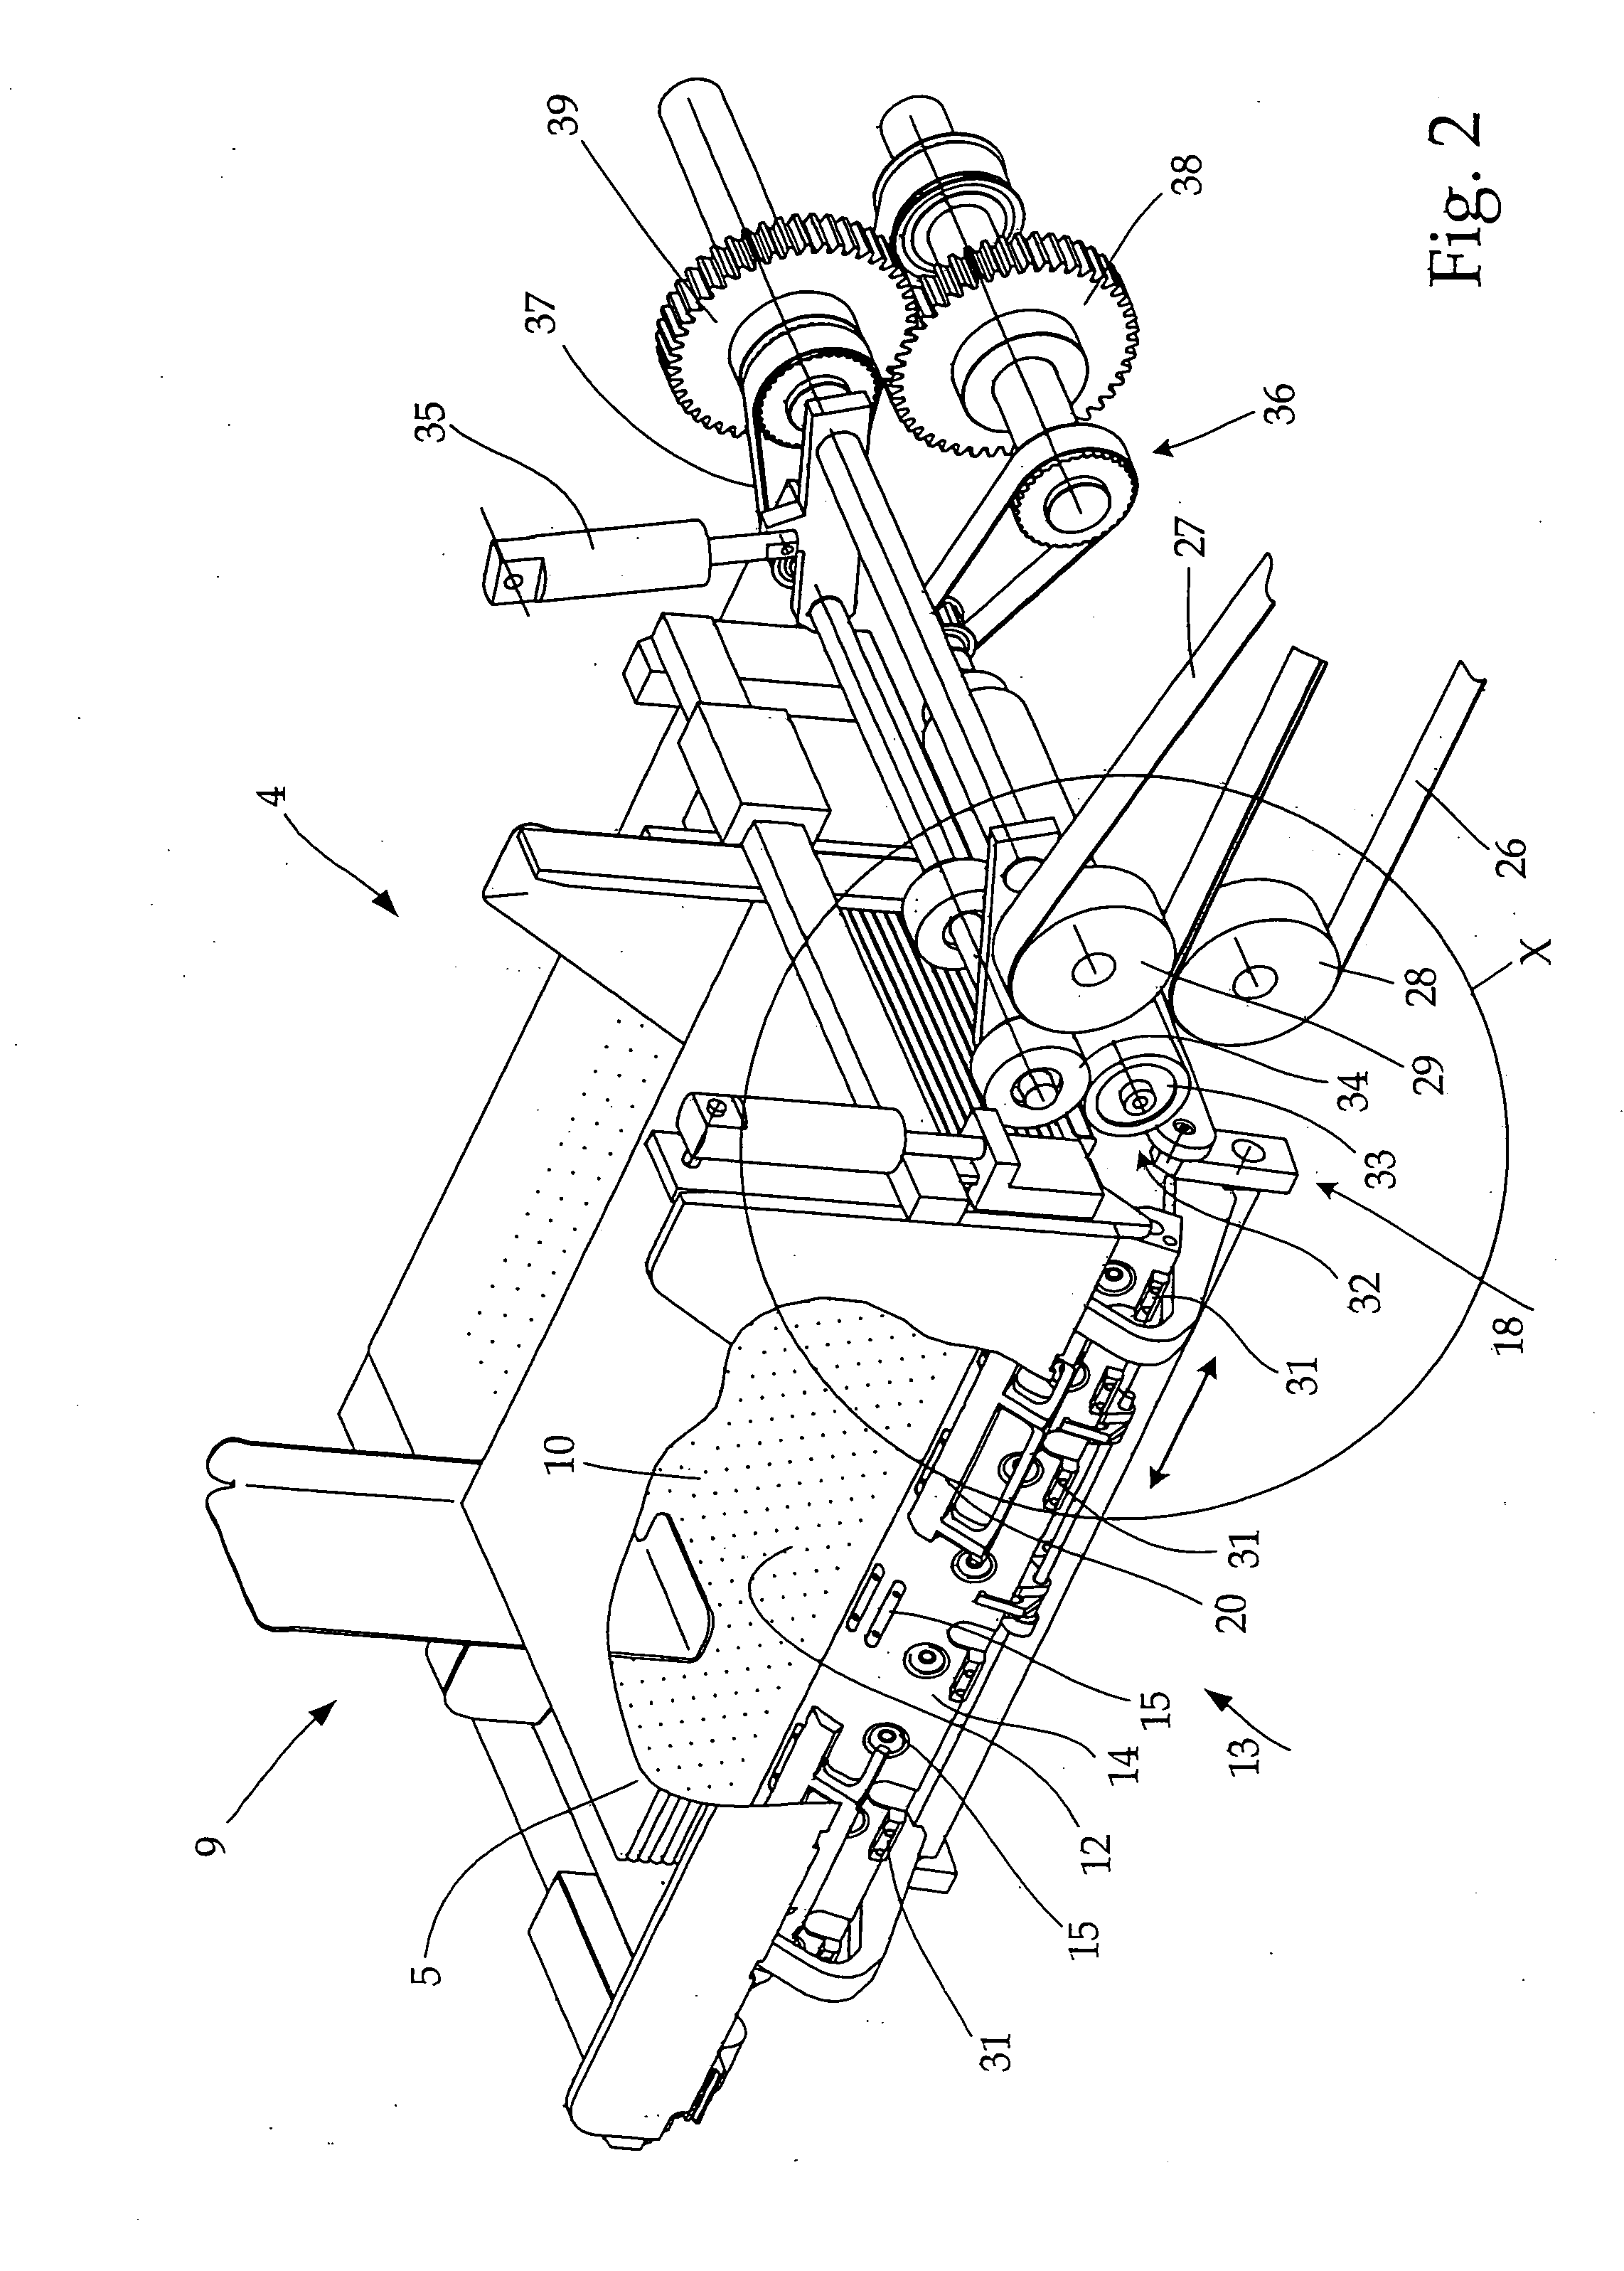 Method and apparatus for producing bound books, magazines or brochures